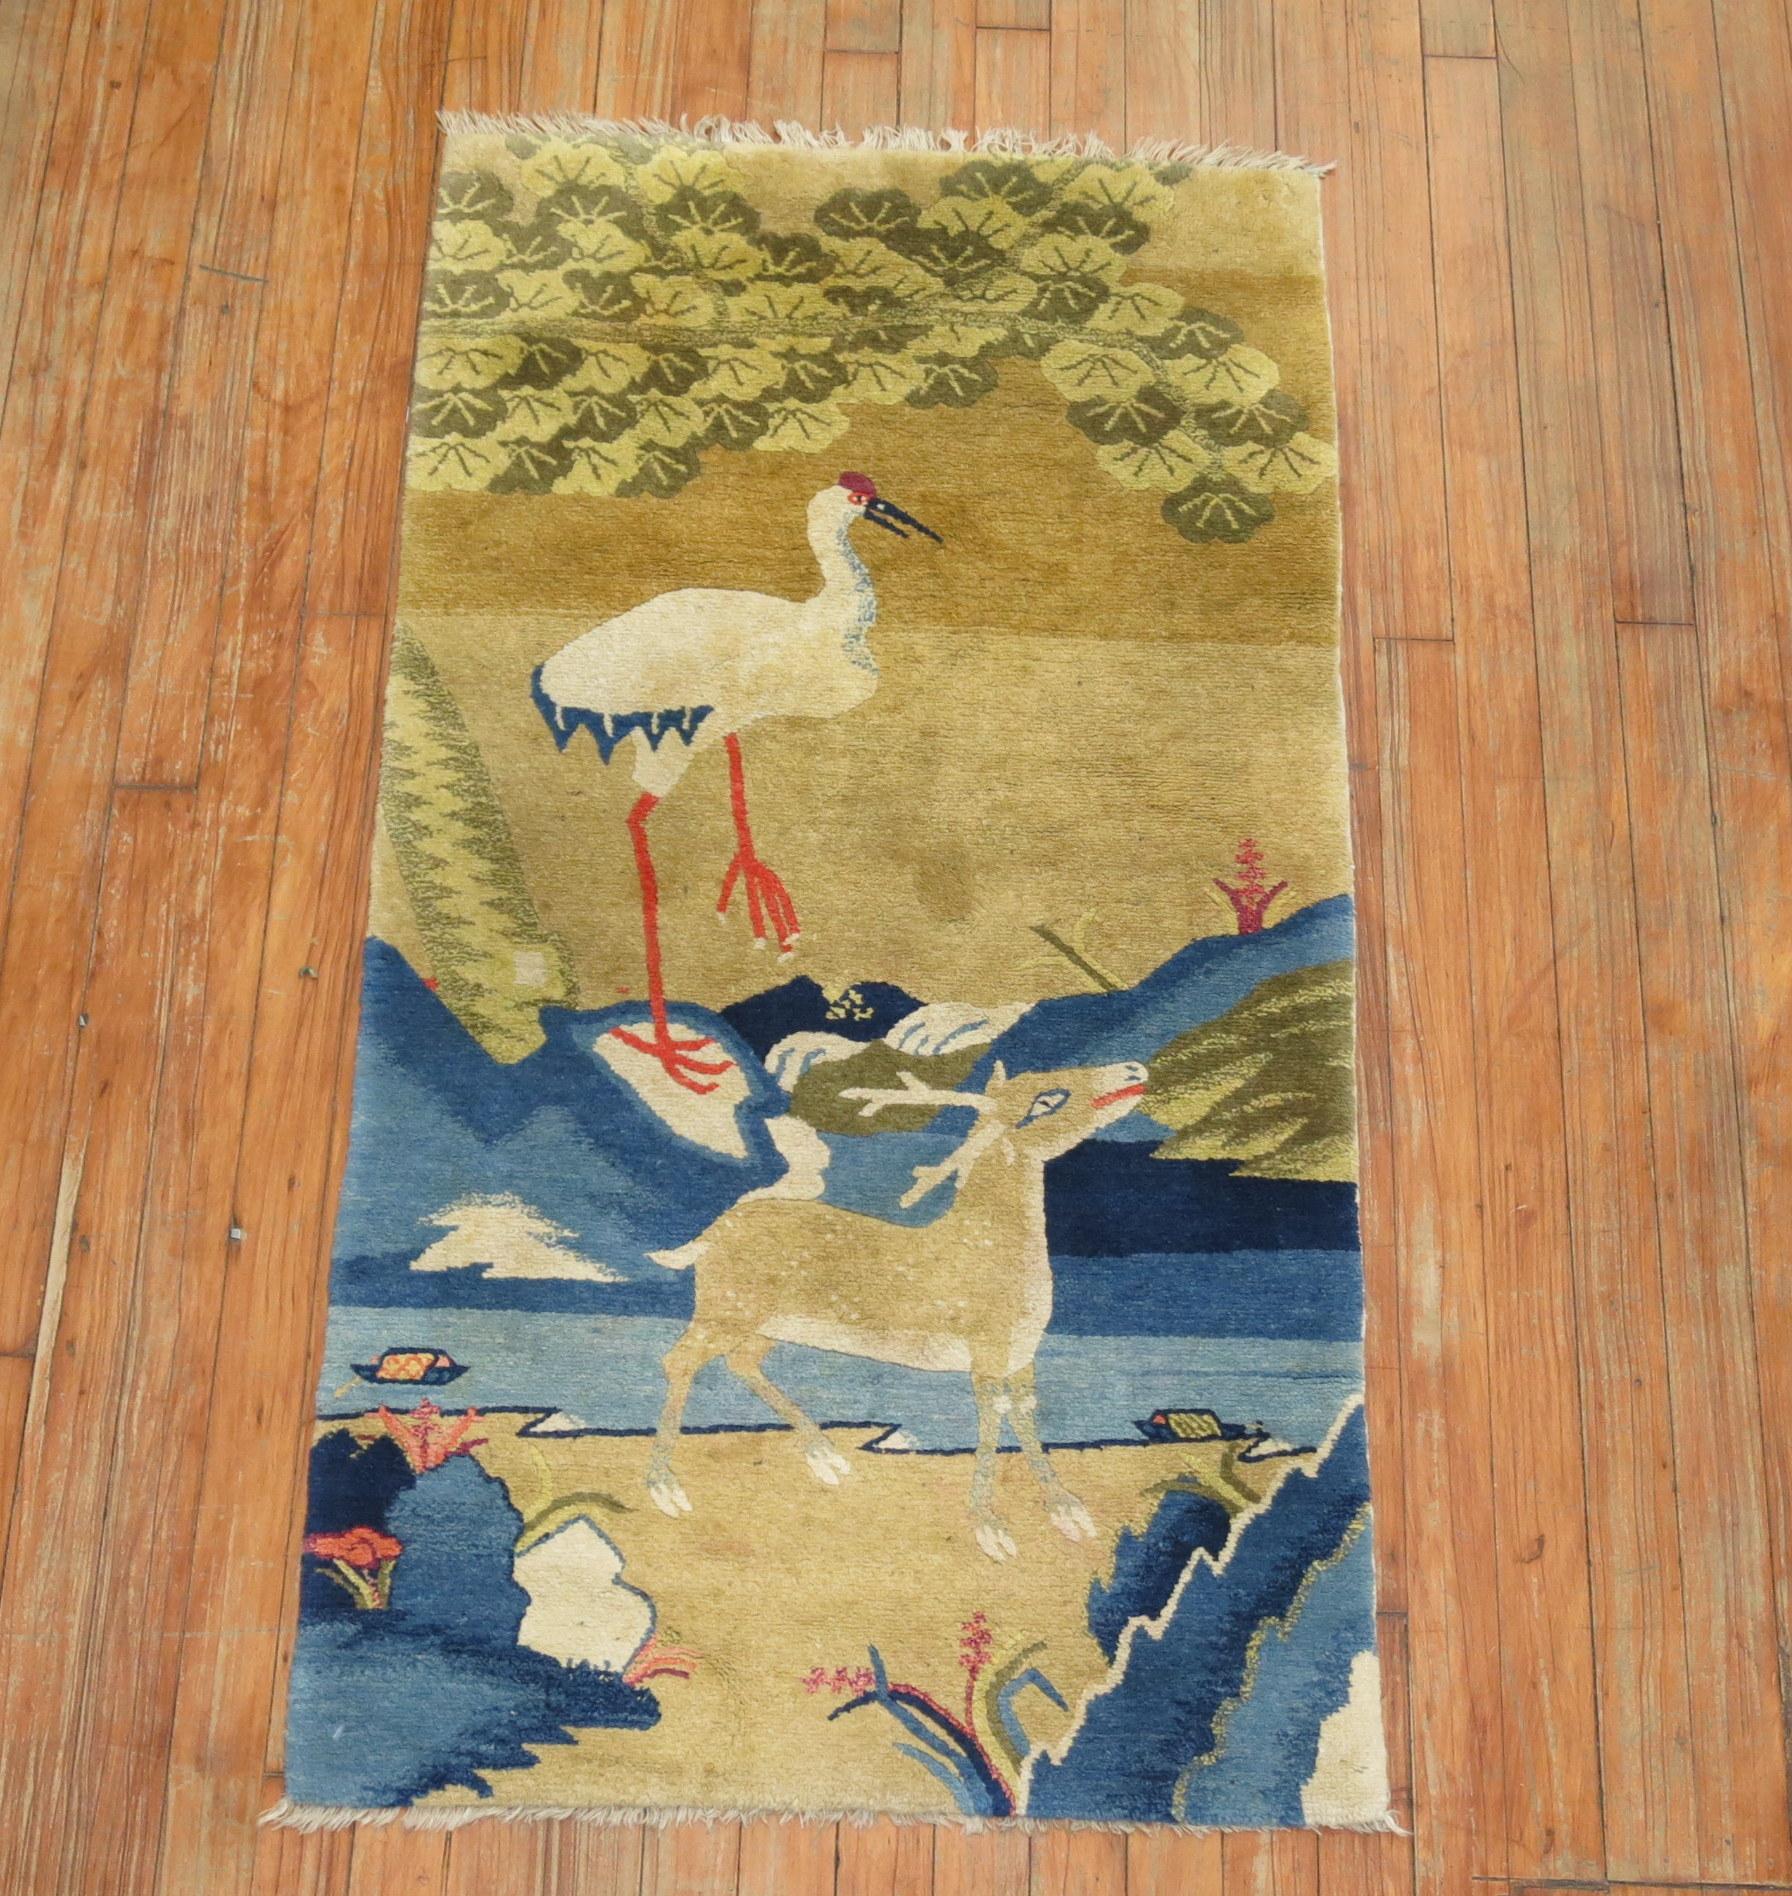 A fine quality antique Tibetan throw size rug depicting a baby deer and swan with a scenic landscape in light blue, camel, brown and ivory accents.

Measures: 2'2